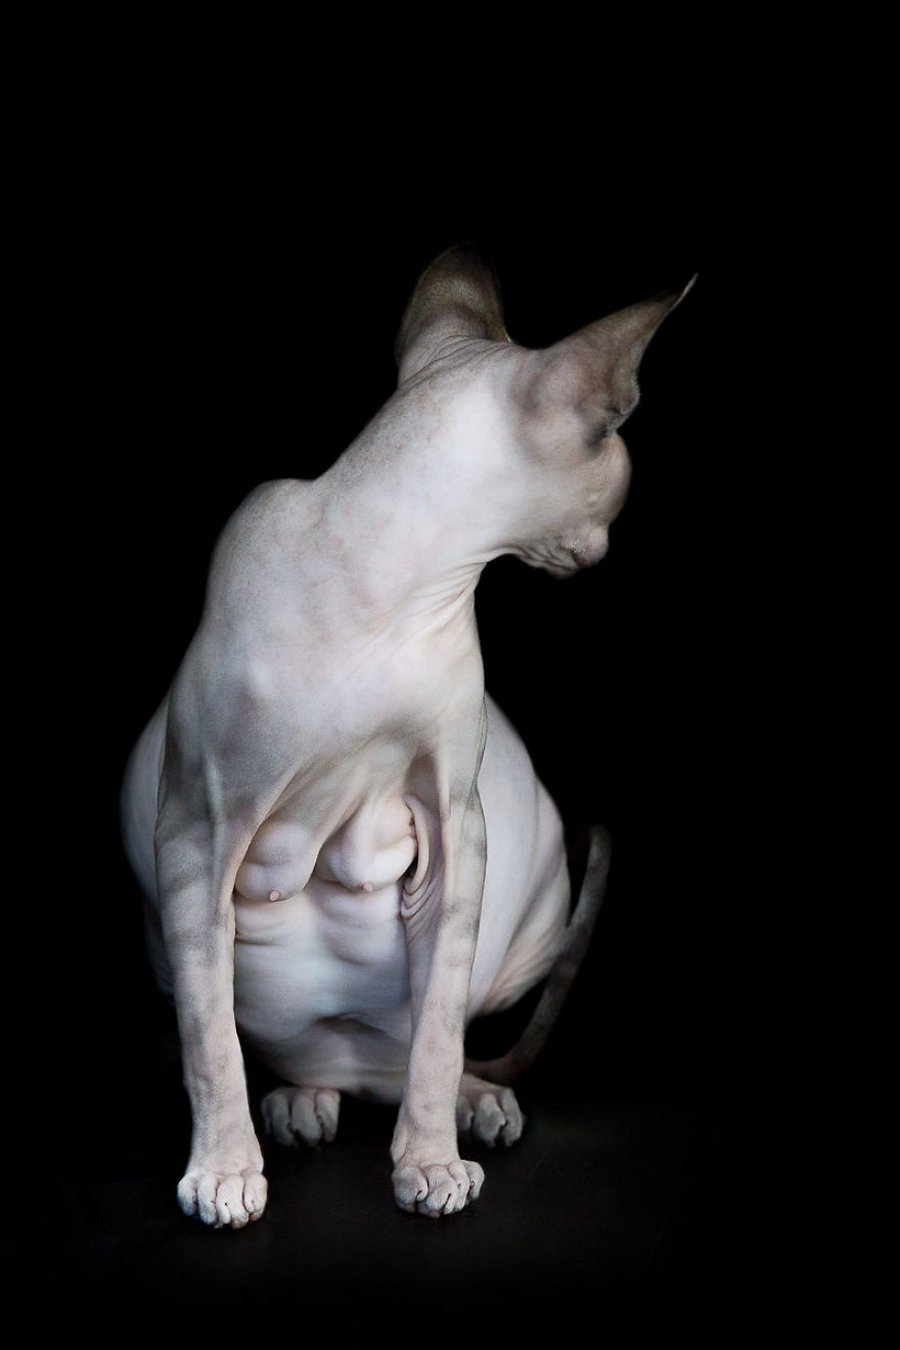 This Naked, Wrinkly Sphynx Cat Has The Internet Falling In 